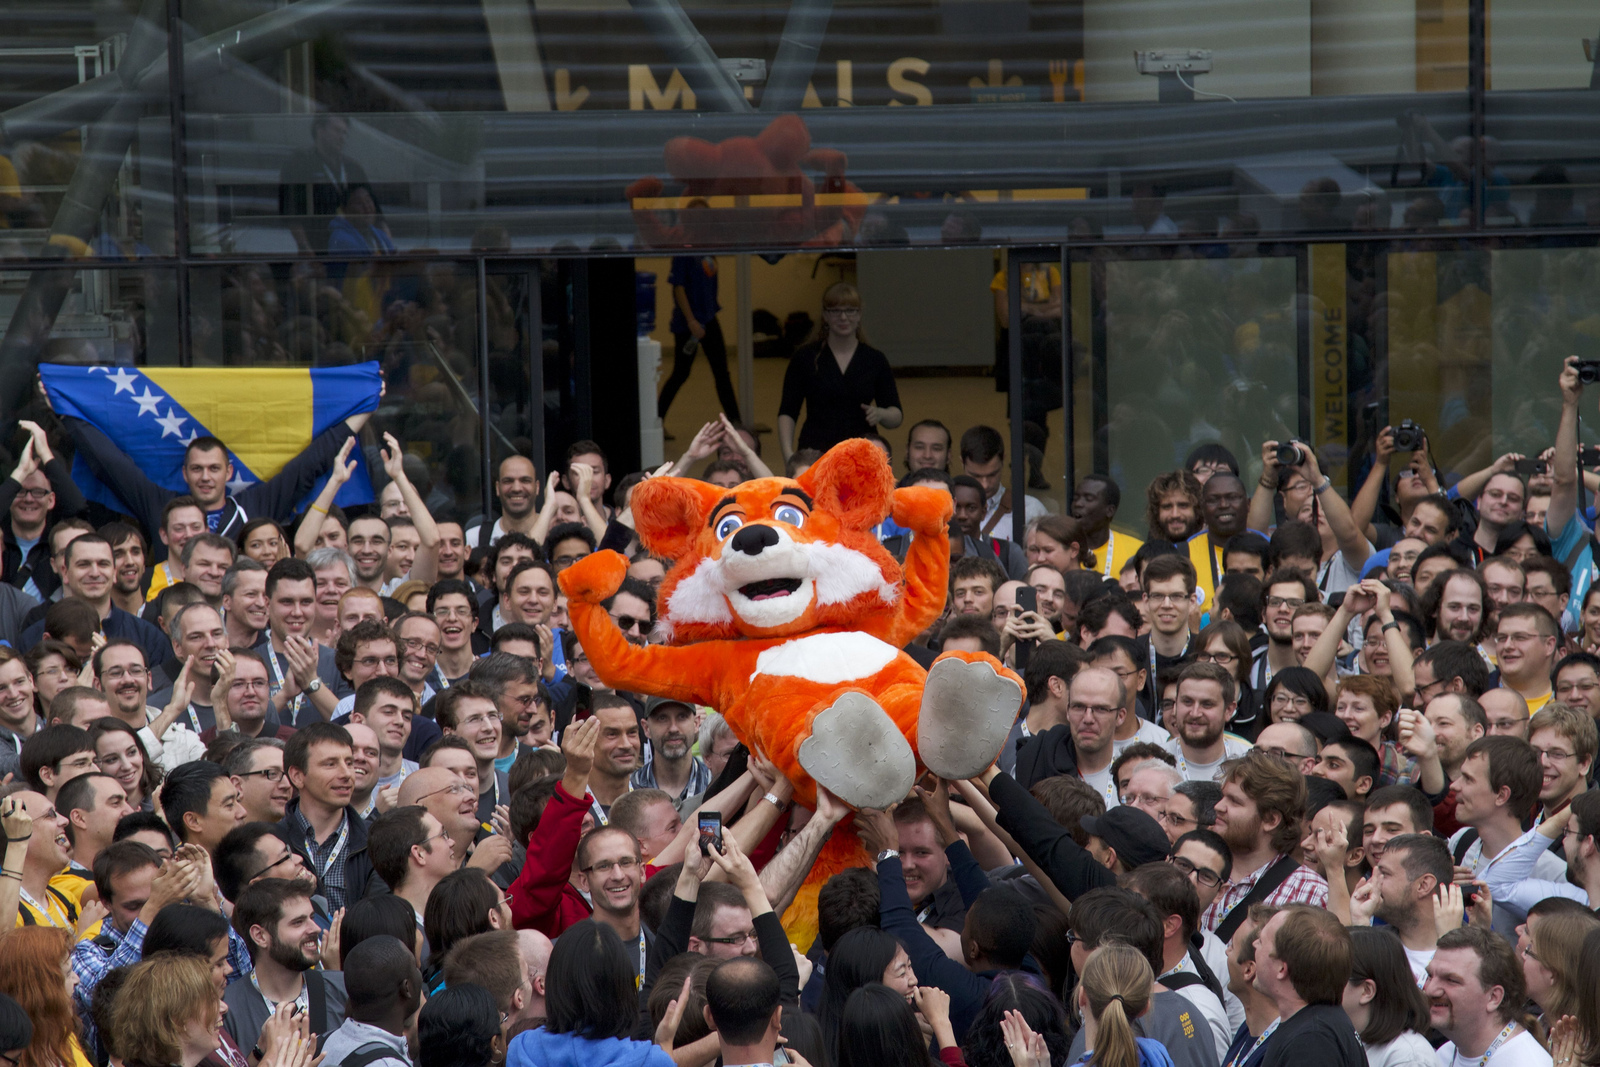 The "Foxy" mascot is held aloft by attendees of the Mozilla 2013 Summit in Brussels